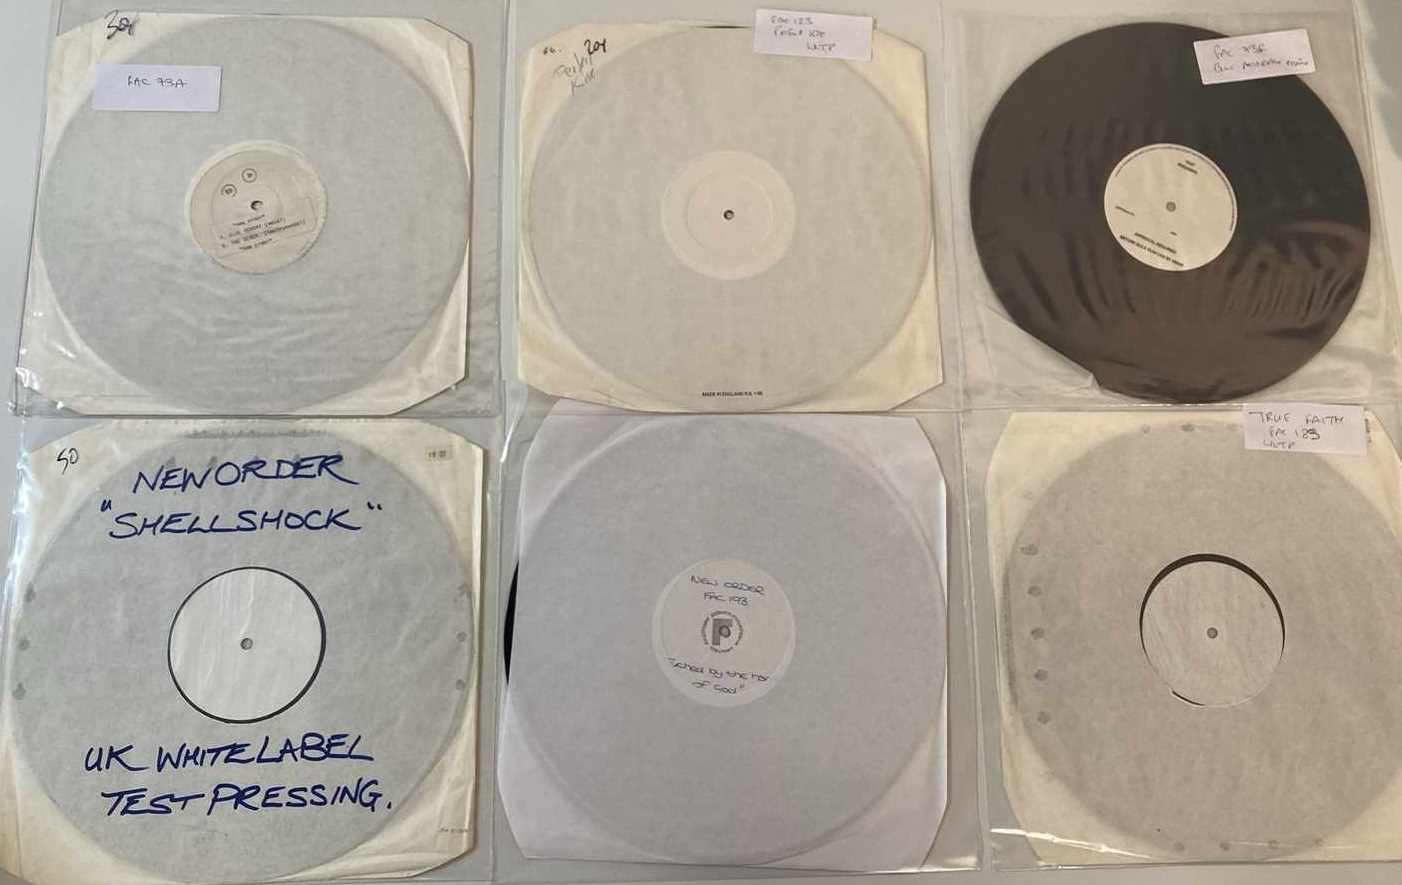 Lot 351 - NEW ORDER - 12" WHITE LABEL TEST PRESSINGS/PROMOS